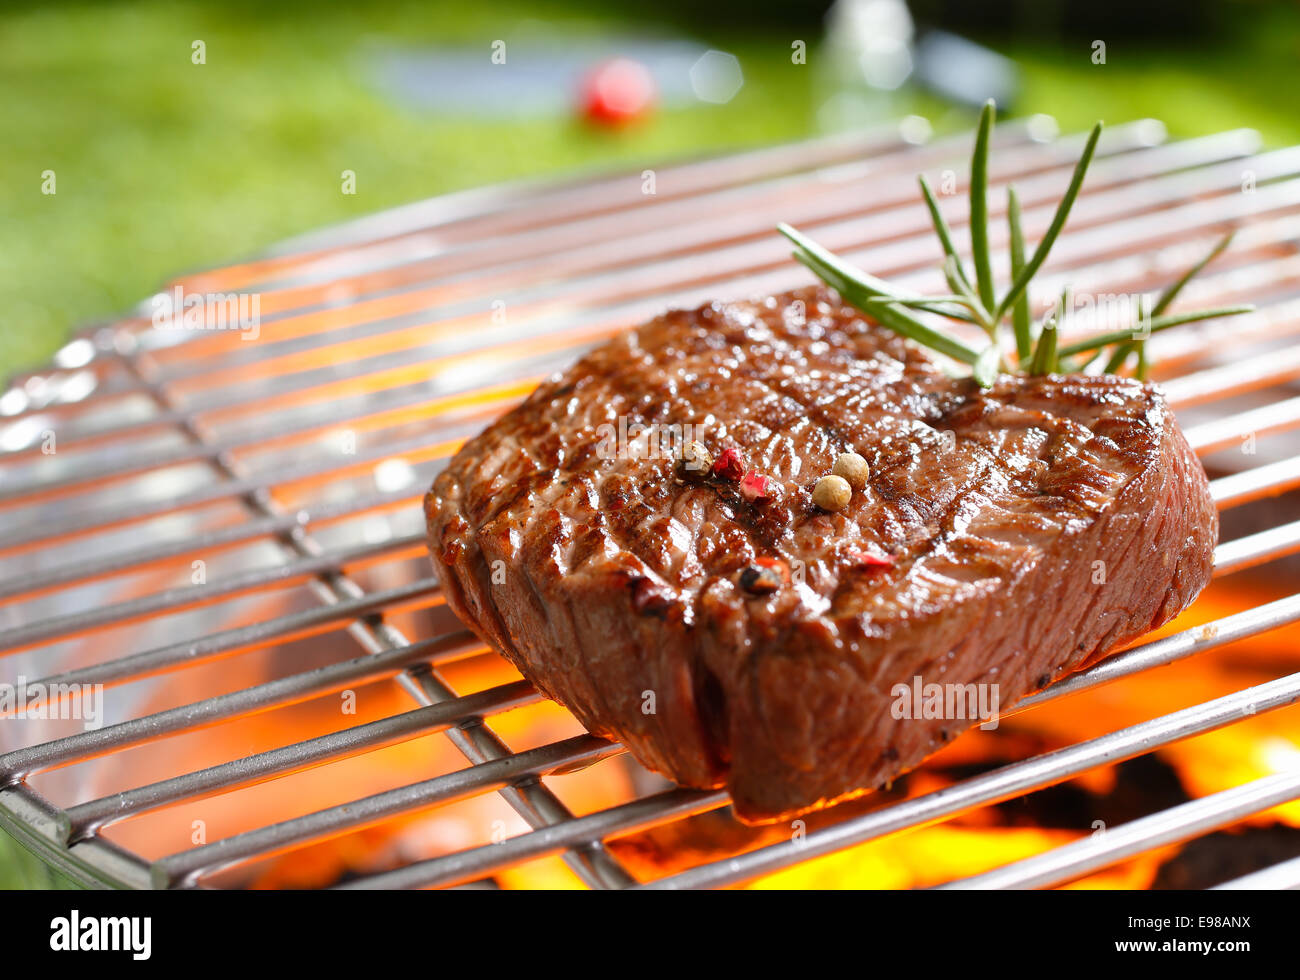 A thick strip steak being grilled outdoors Stock Photo - Alamy